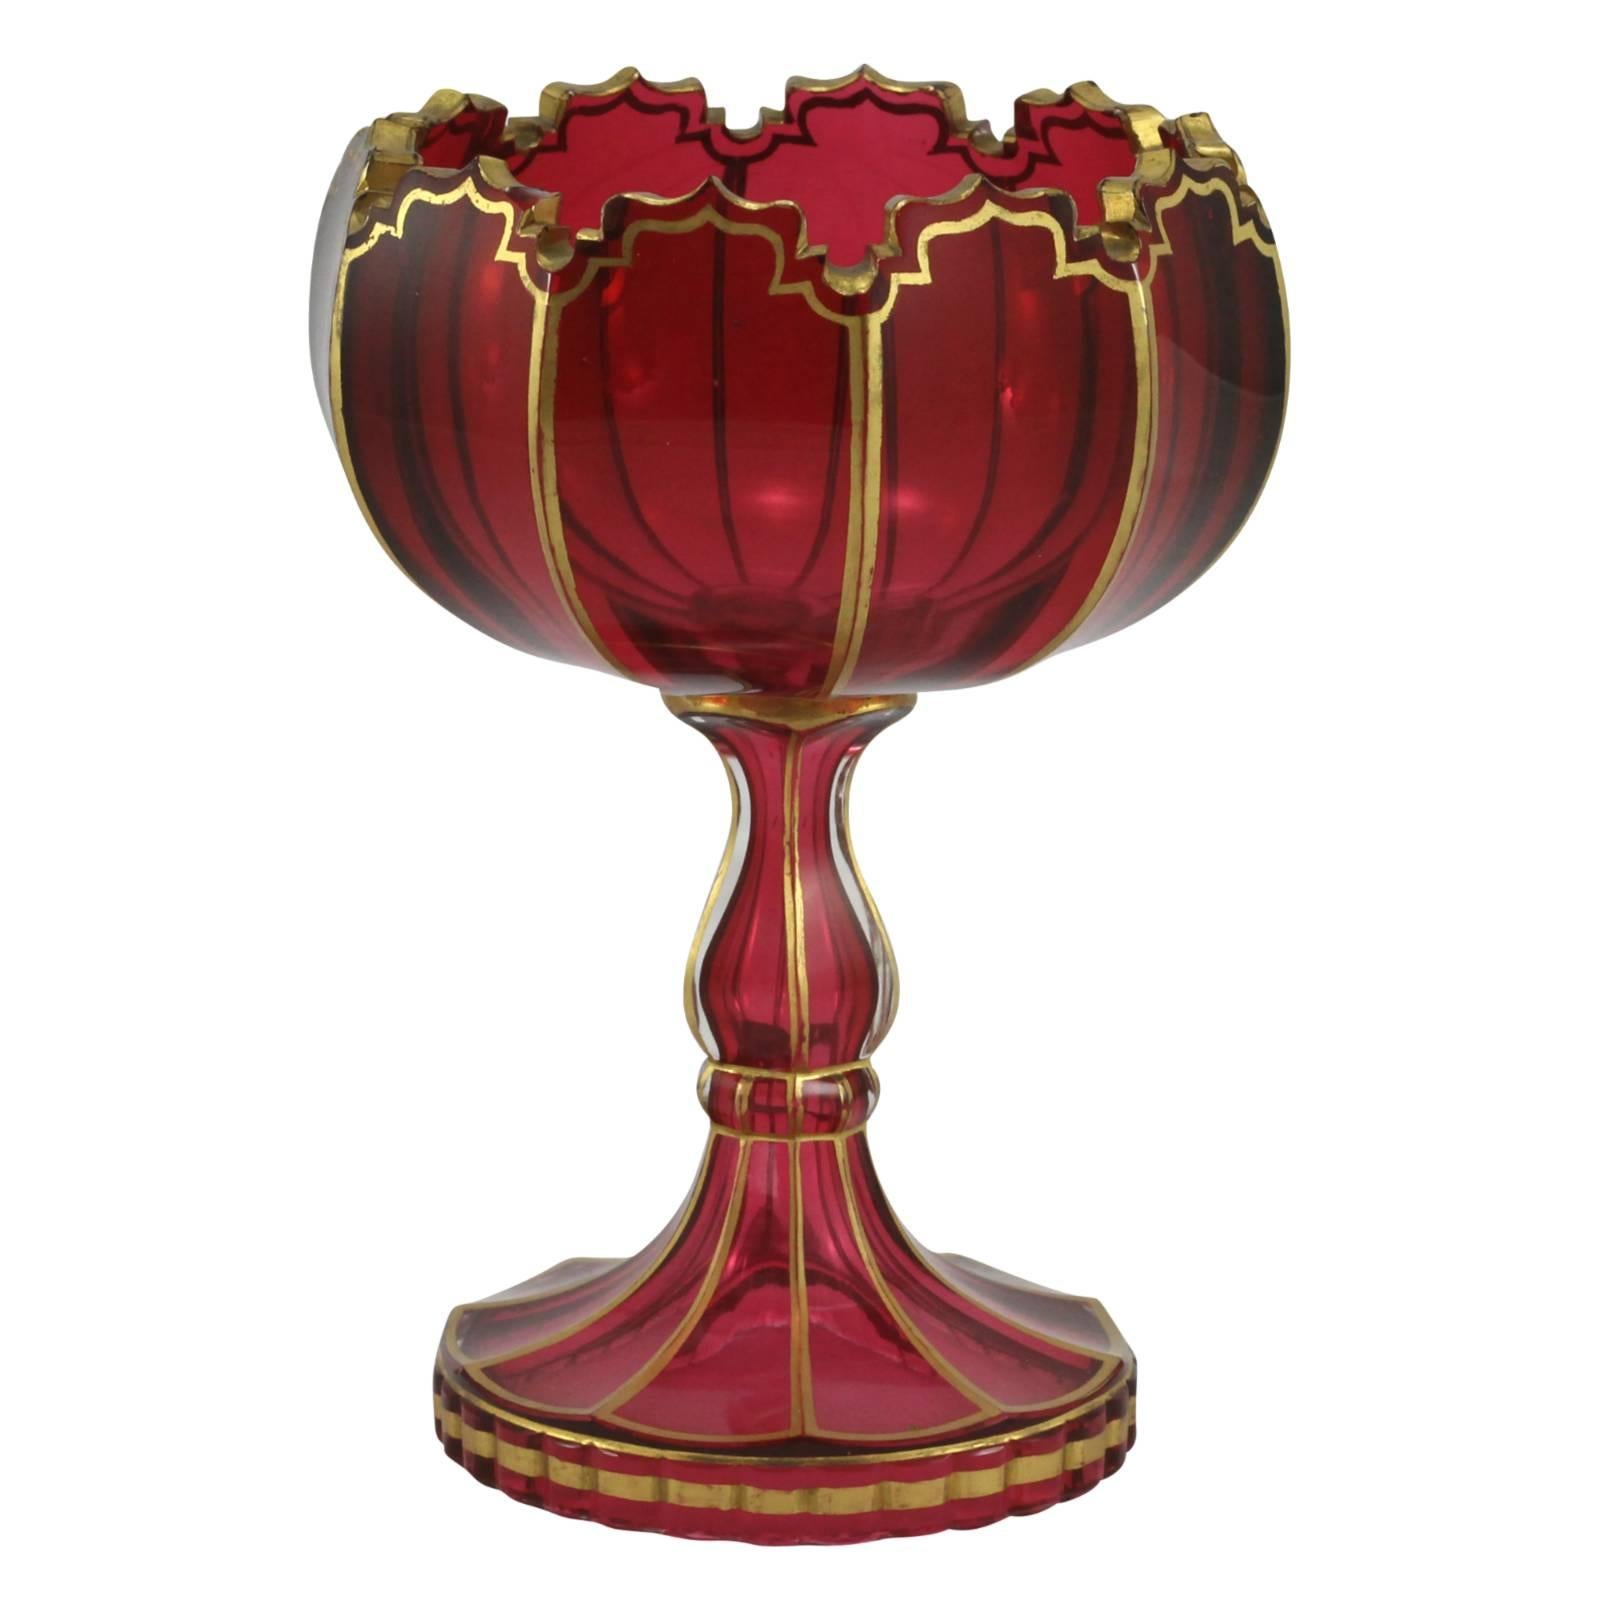 19th Century European Gilt Ruby Glass Compote